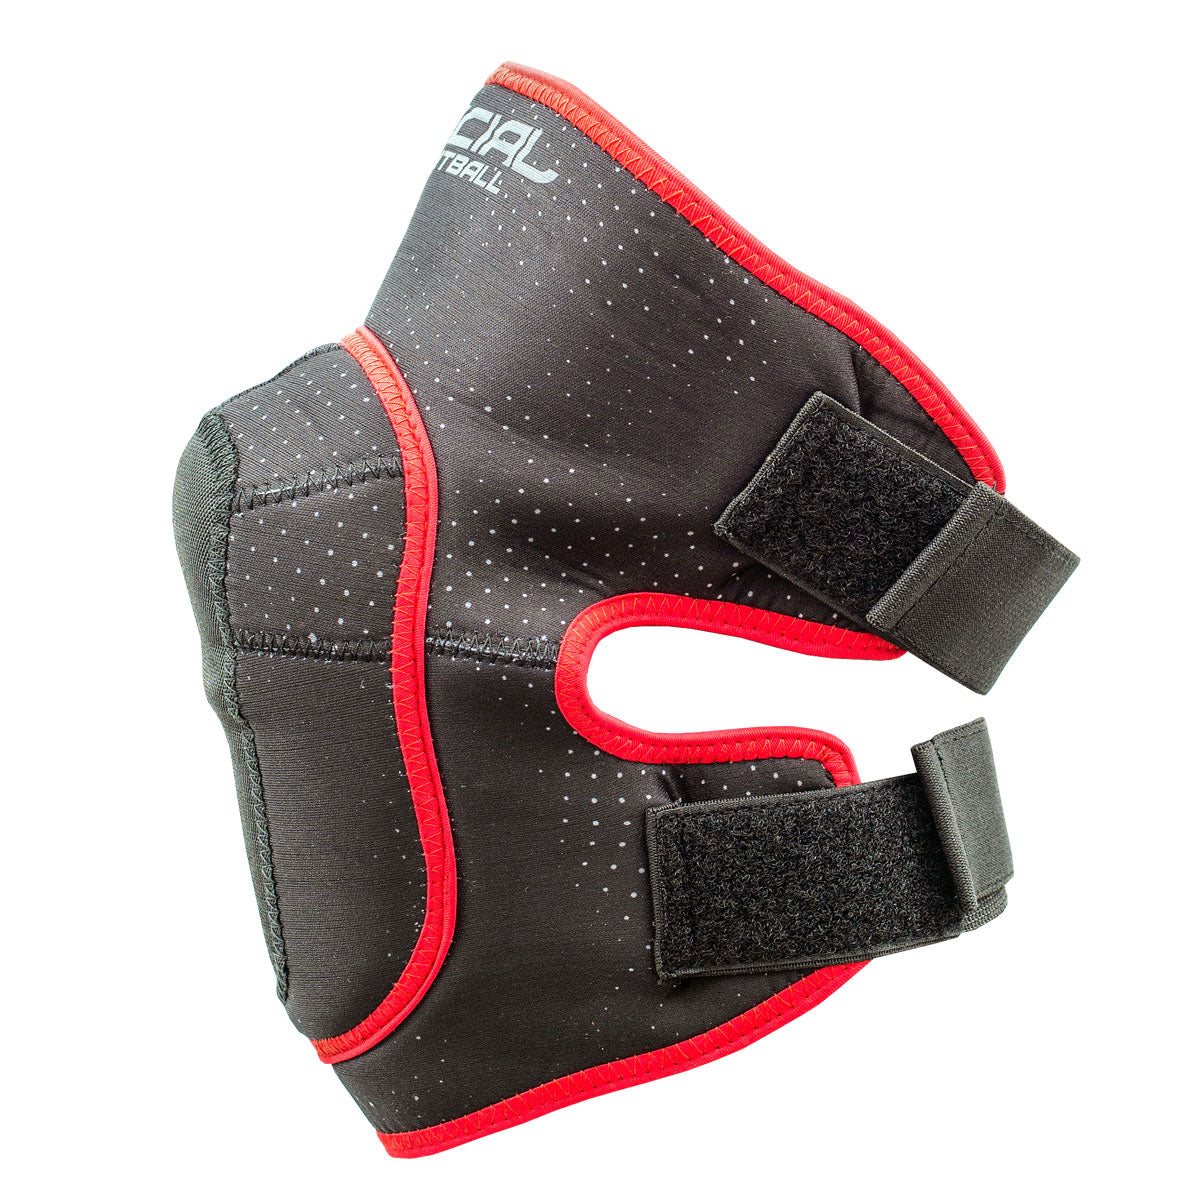 Social Paintball SMPL Elbow Pads - Black / Red 